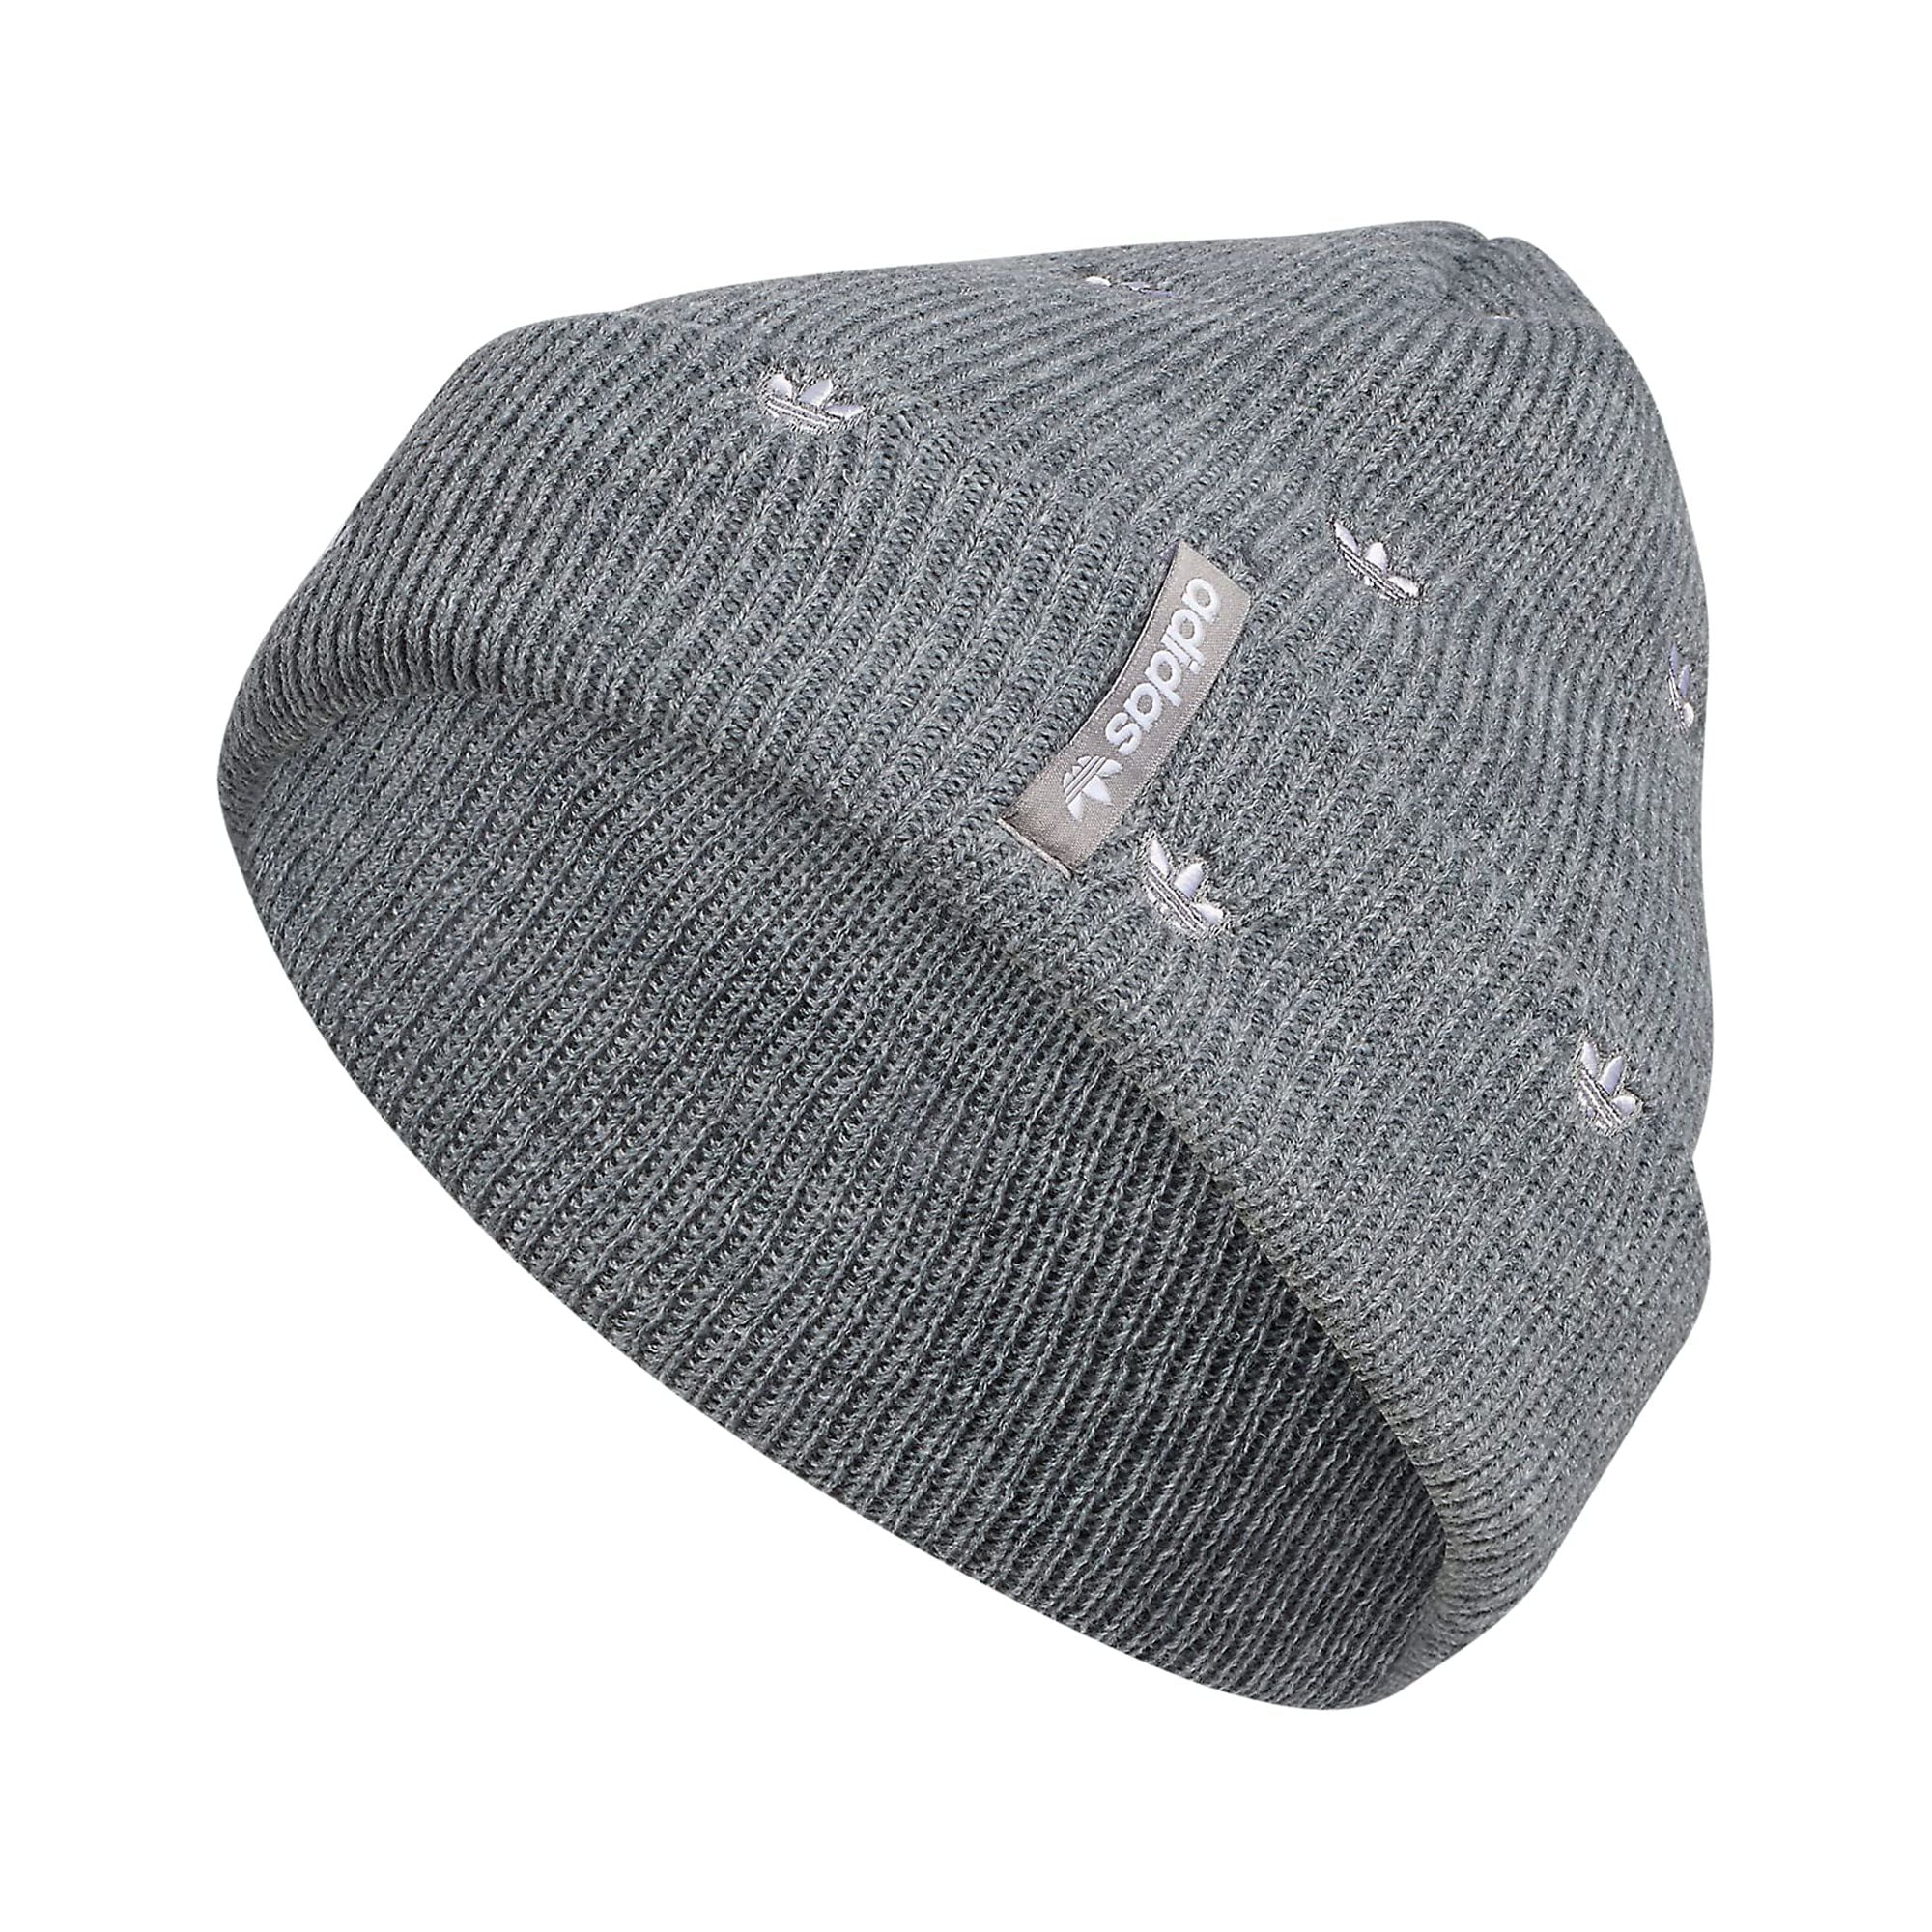 adidas Originals AOP Embroidery Cuff Fold Beanie, Heather Grey/White, One  Size | Beanies